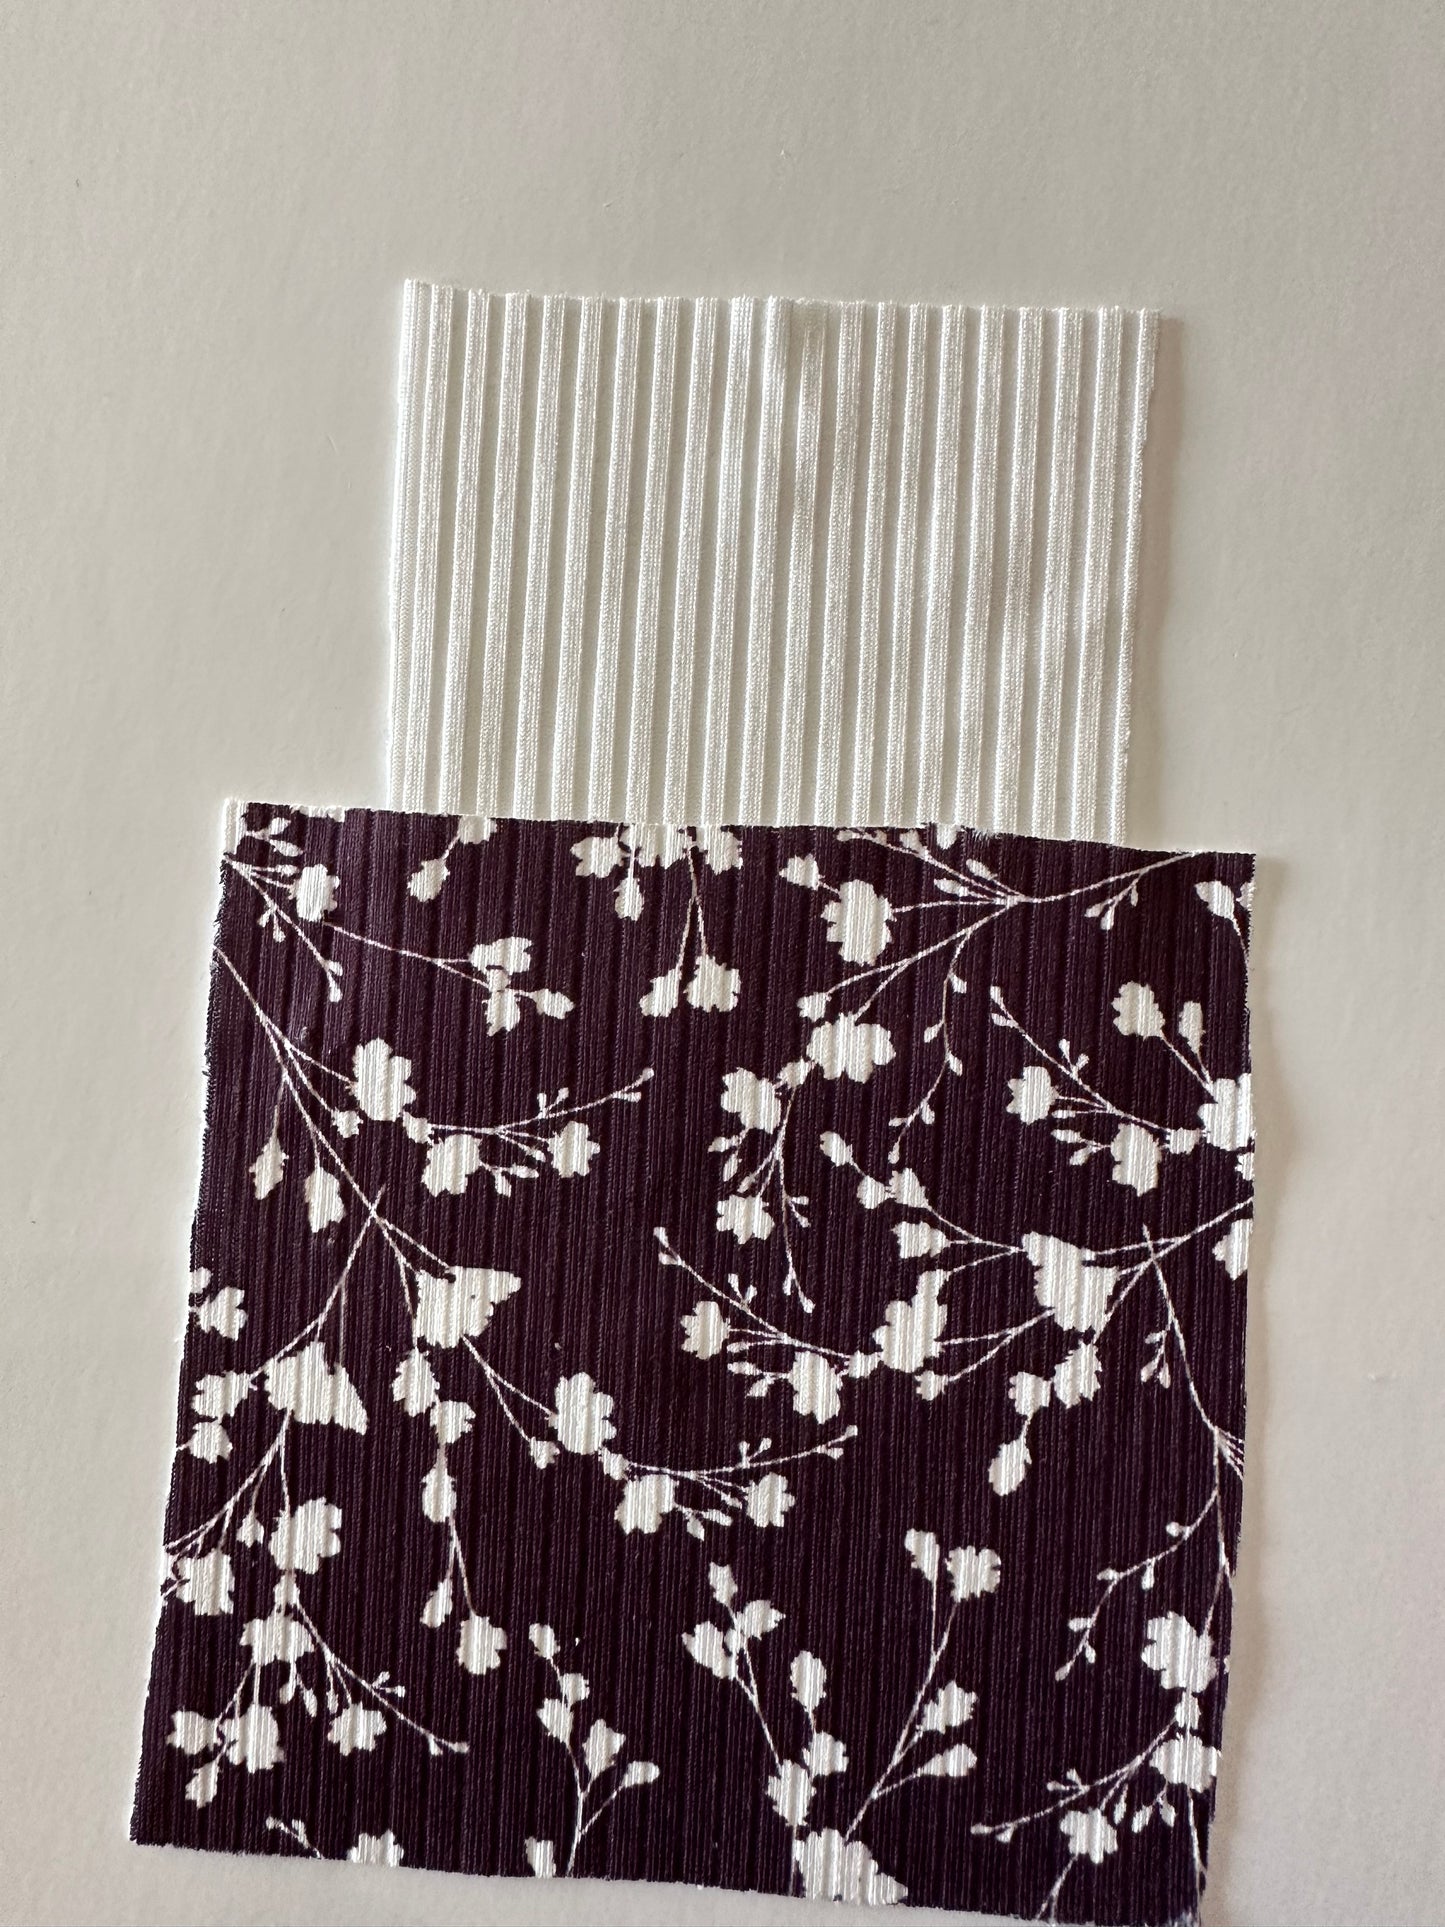 Pre-Order Harper Floral in Plum on Unbrushed Rib Knit Fabric Sold by the 1/4 yard